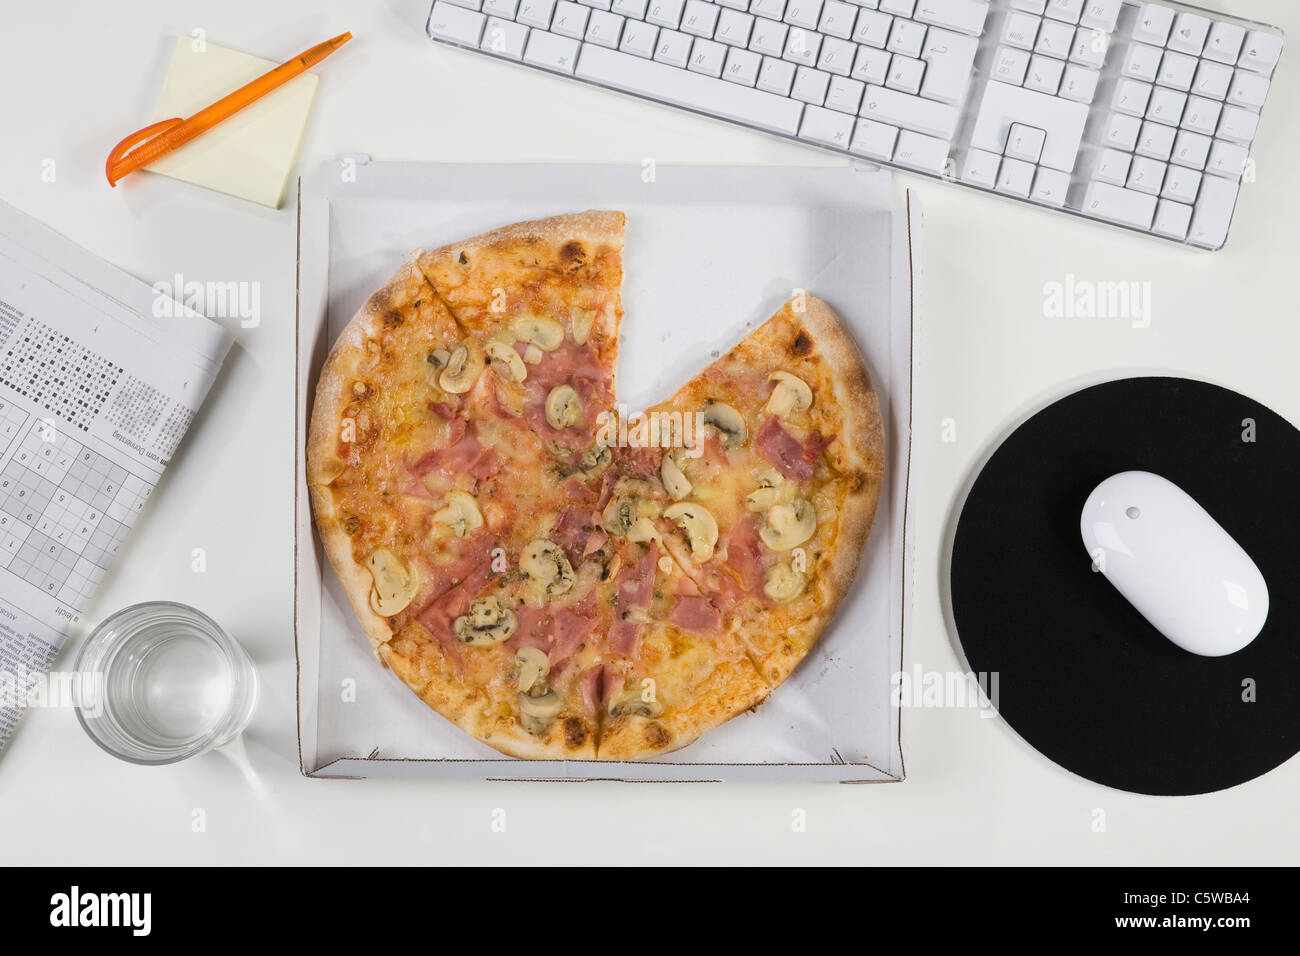 Pizza box on office desk, elevated view Stock Photo